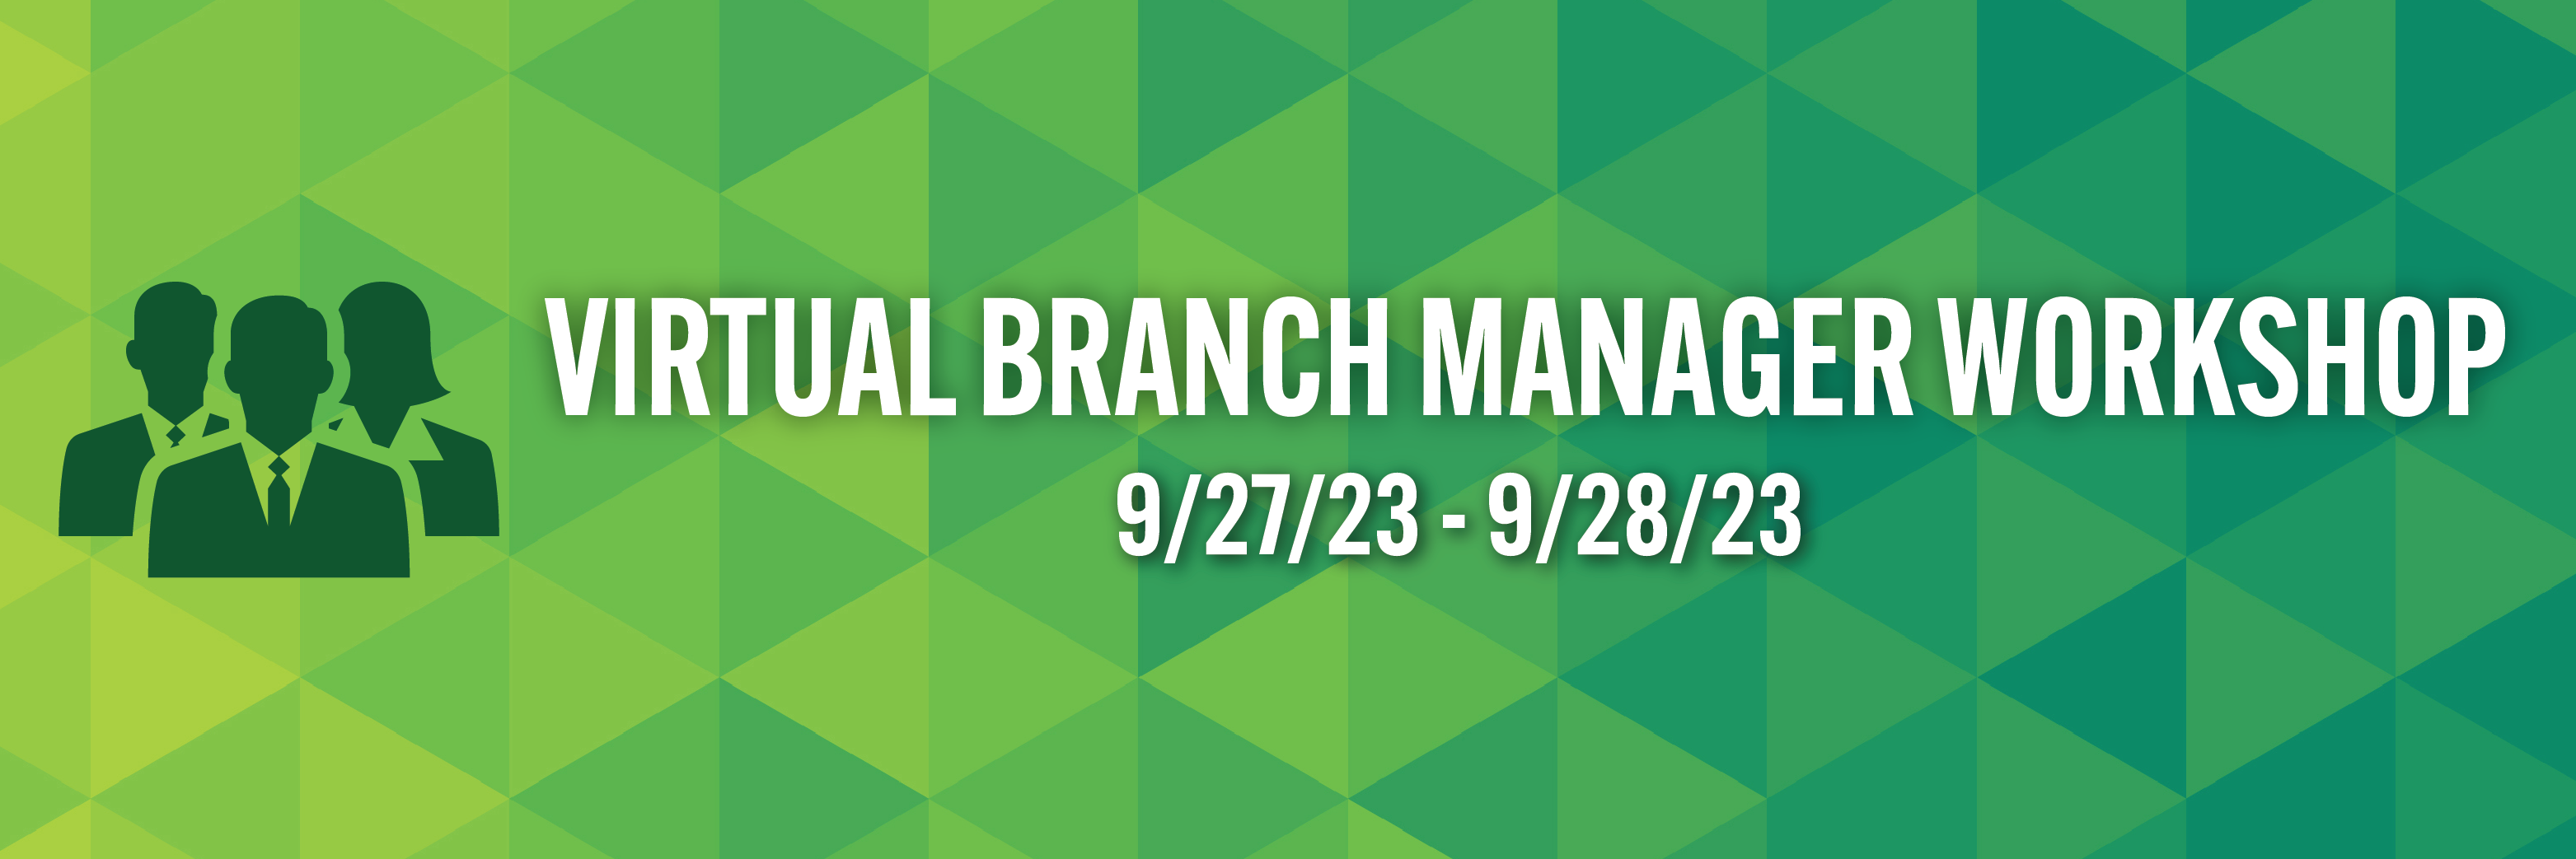 Virtual Branch Manager Training 2